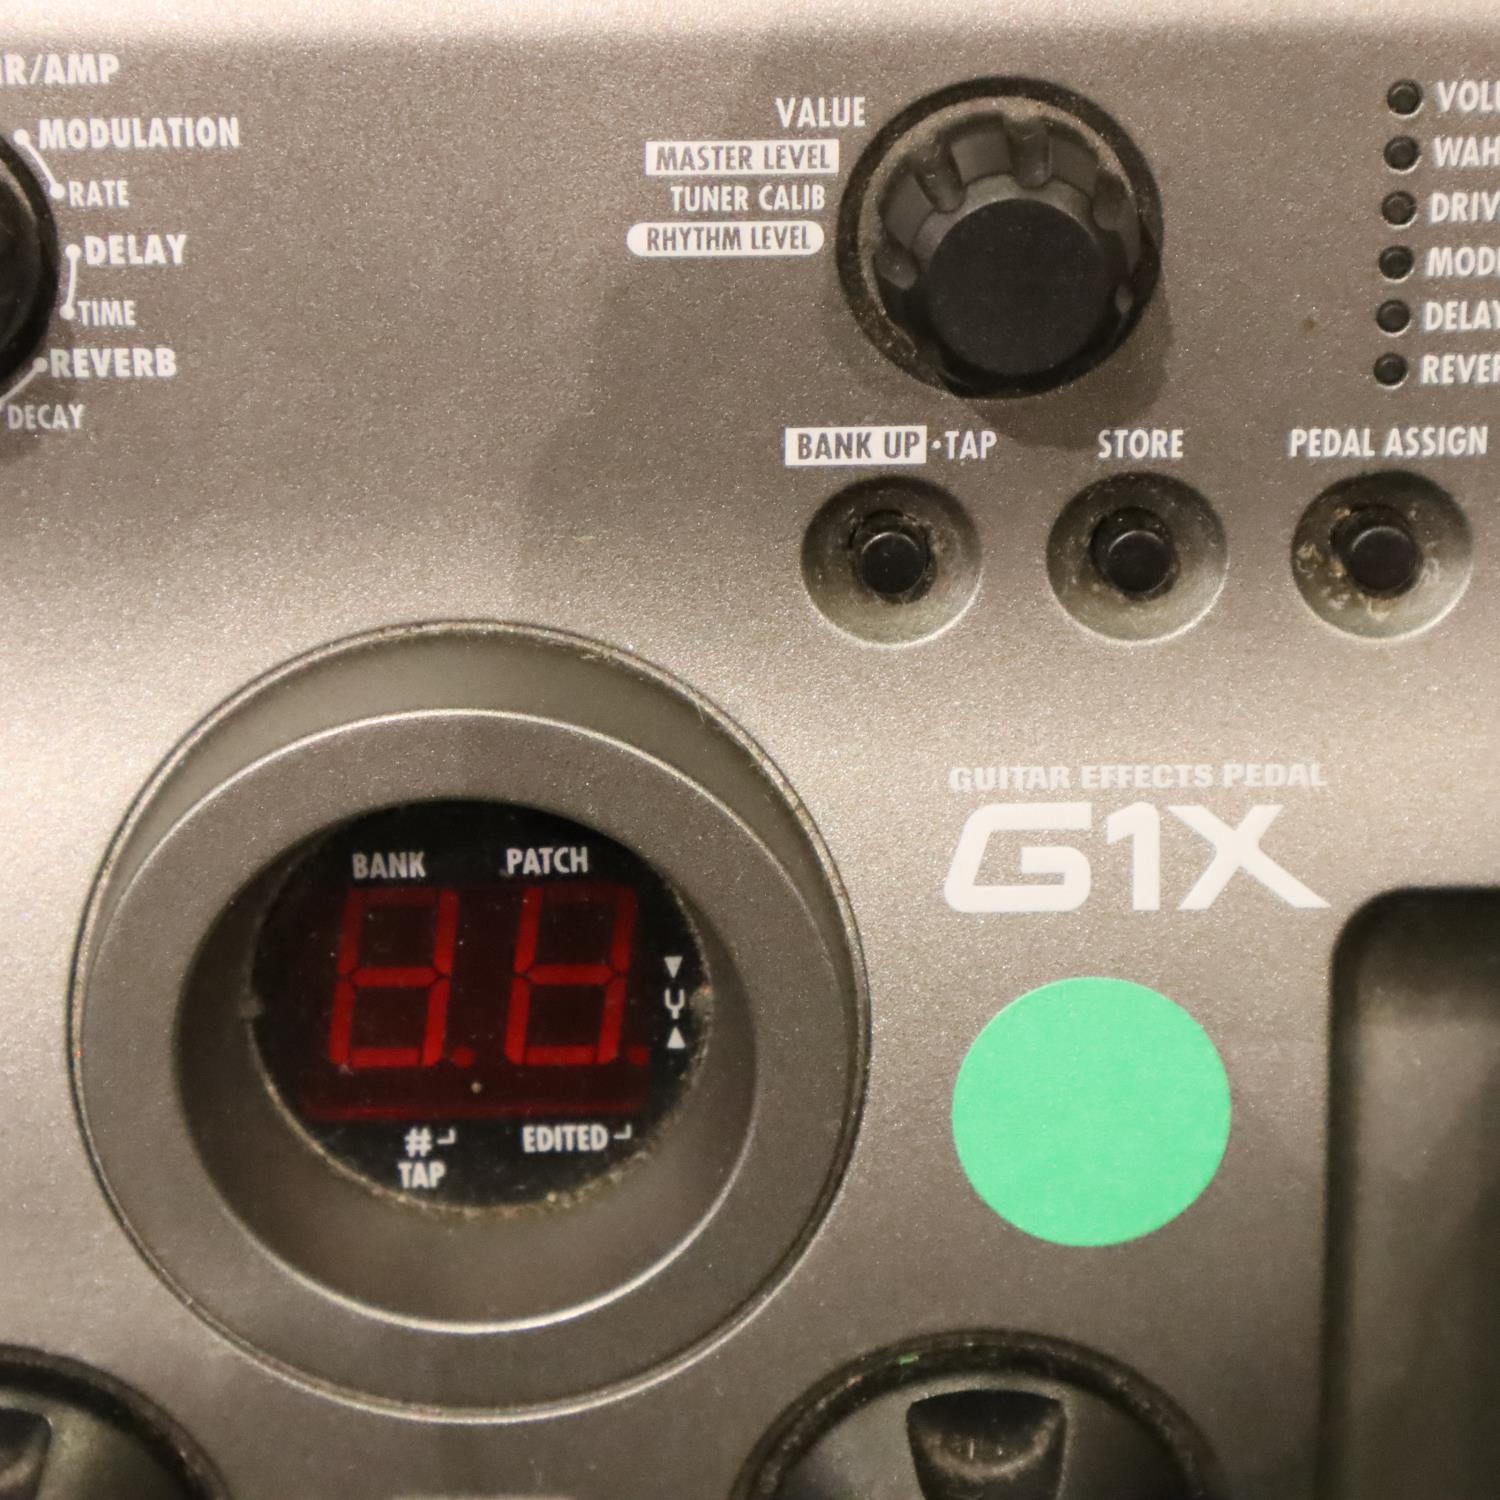 Zoom G1X guitar effects pedal. Not available for in-house P&P, contact Paul O'Hea at Mailboxes on - Image 2 of 3